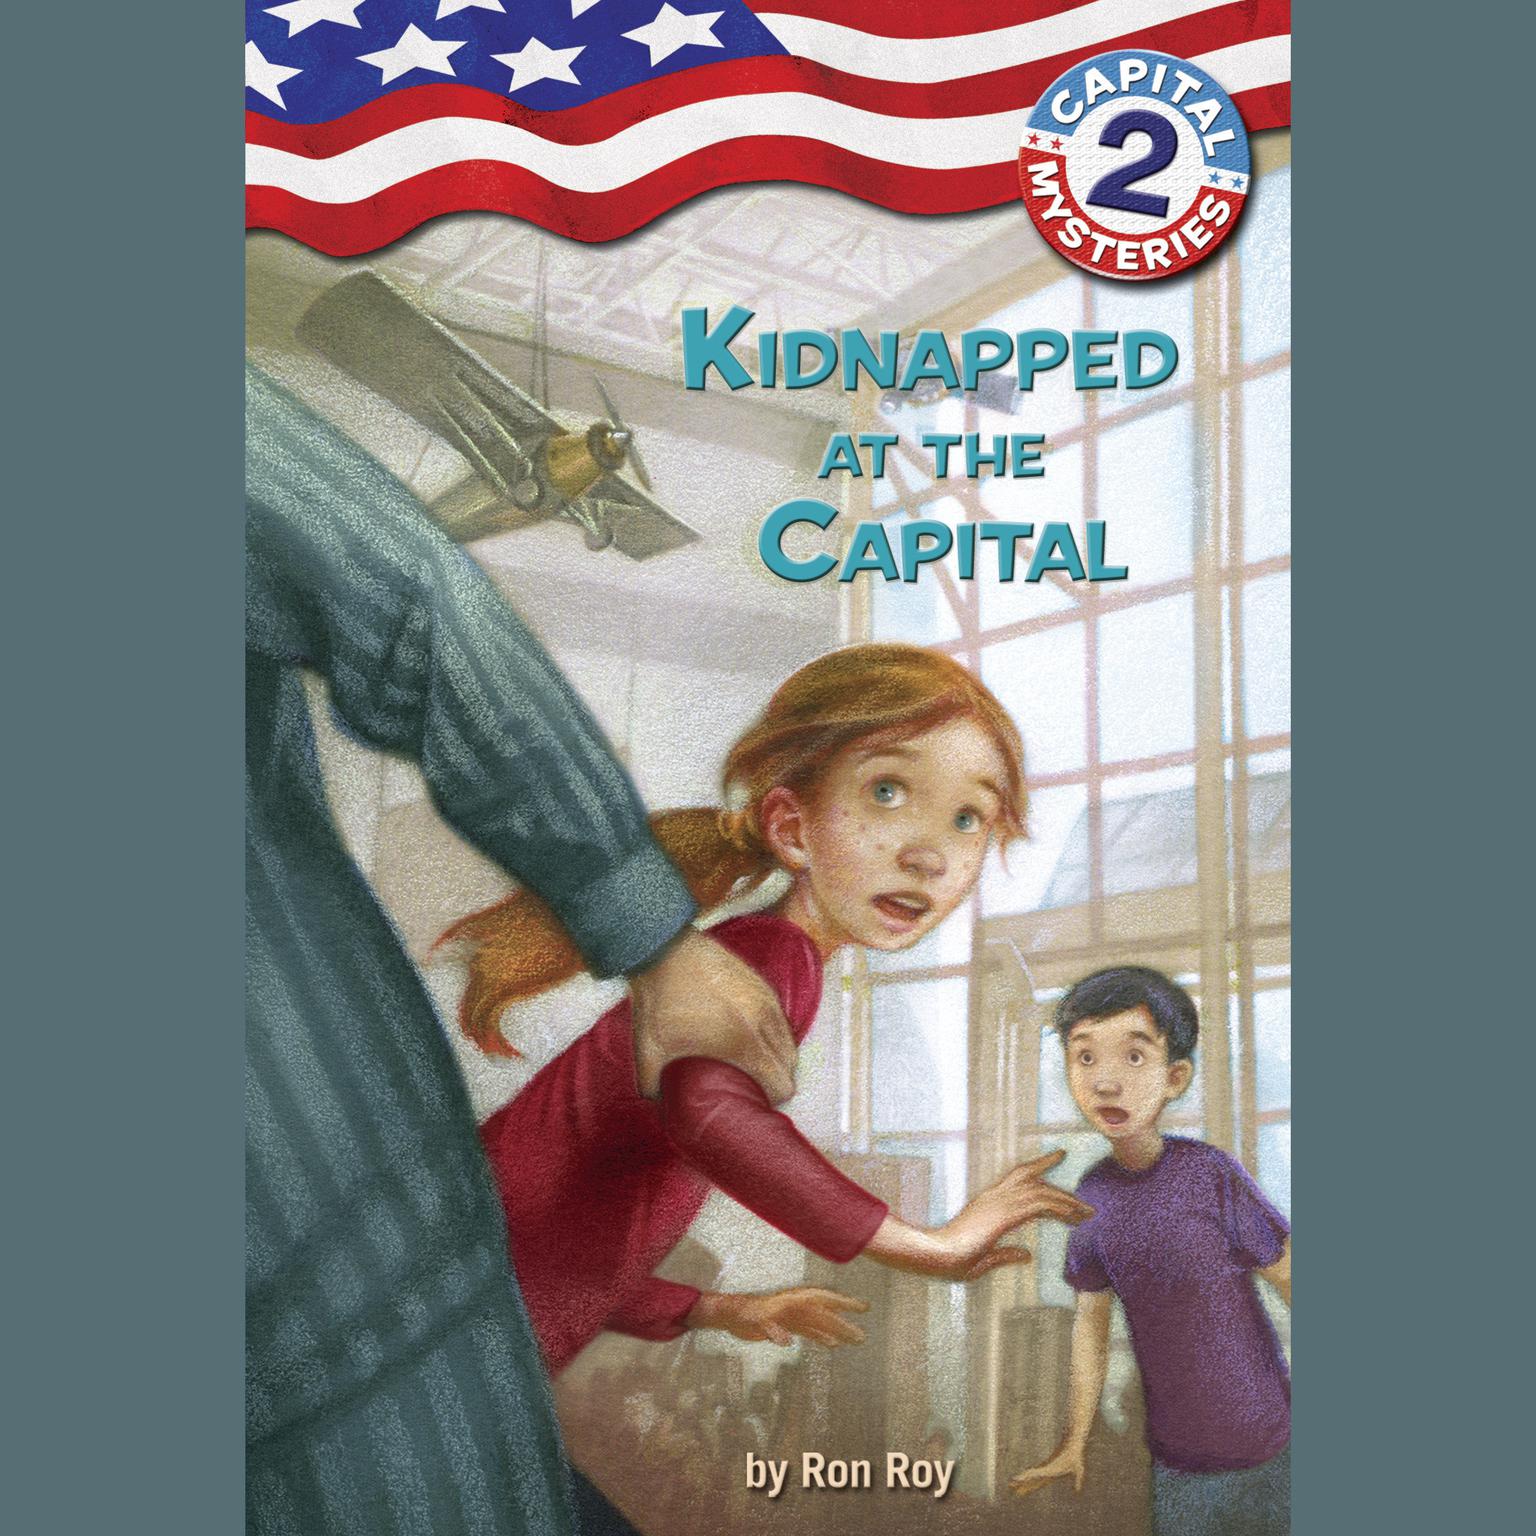 Capital Mysteries #2: Kidnapped at the Capital Audiobook, by Ron Roy